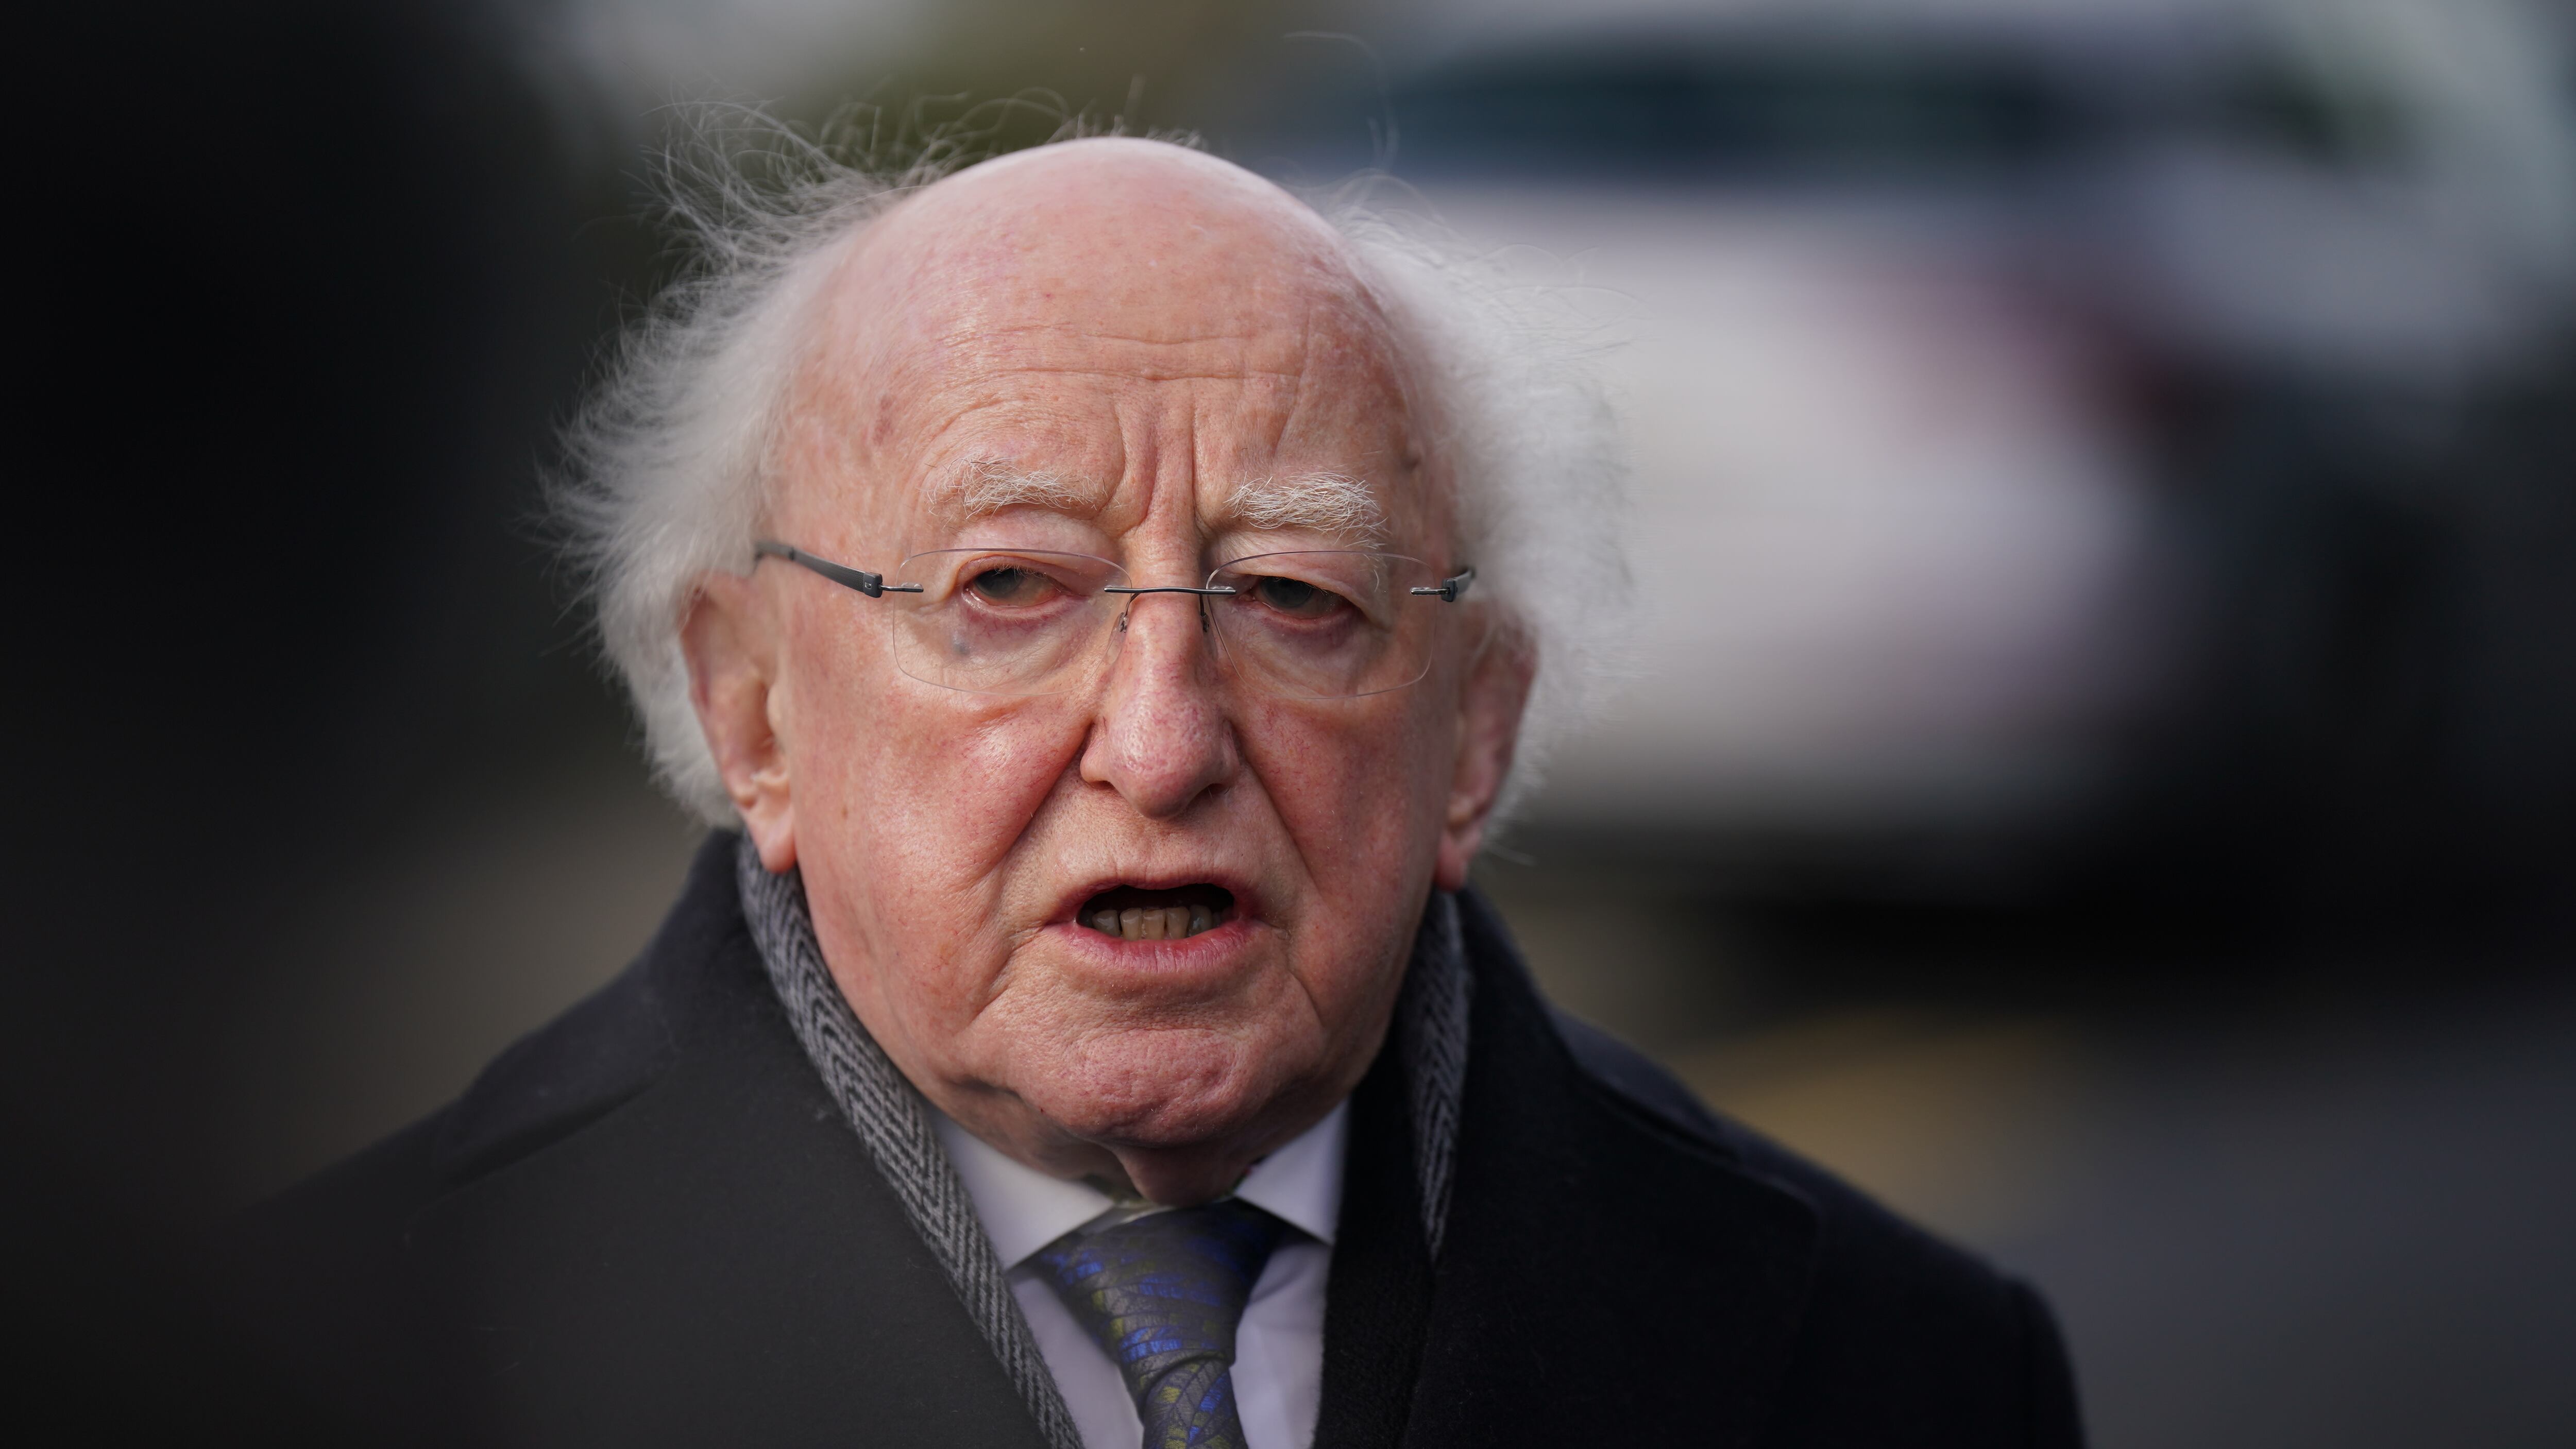 Irish President Michael D Higgins has said his thoughts are with the children in Israel and Gaza this Christmas, while also thanking migrants in Ireland who ‘enrich our culture’